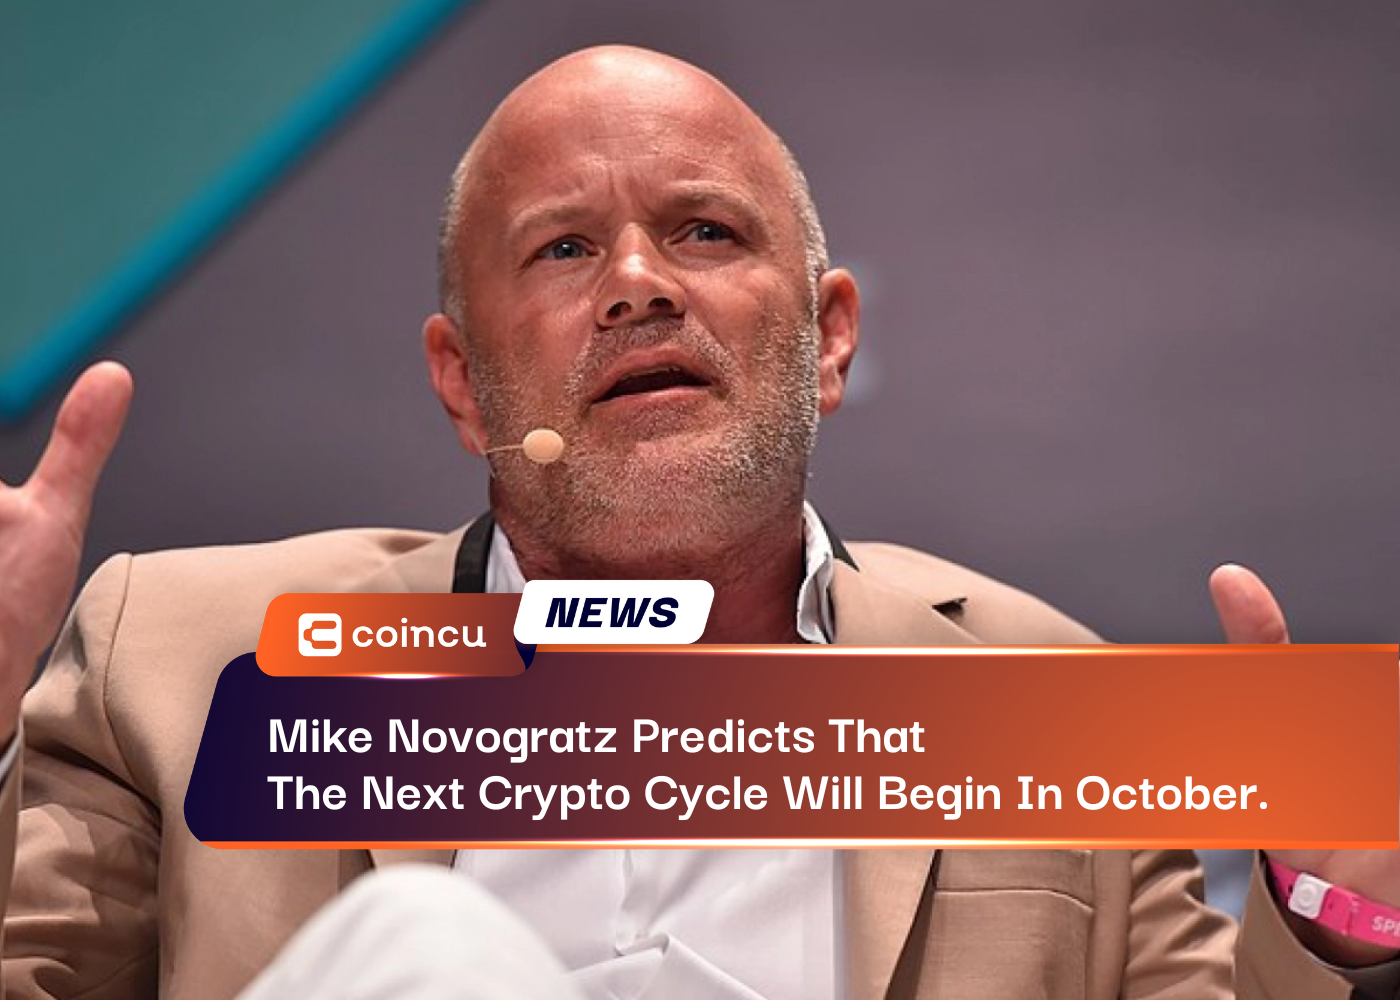 Mike Novogratz Predicts That The Next Crypto Cycle Will Begin In October.